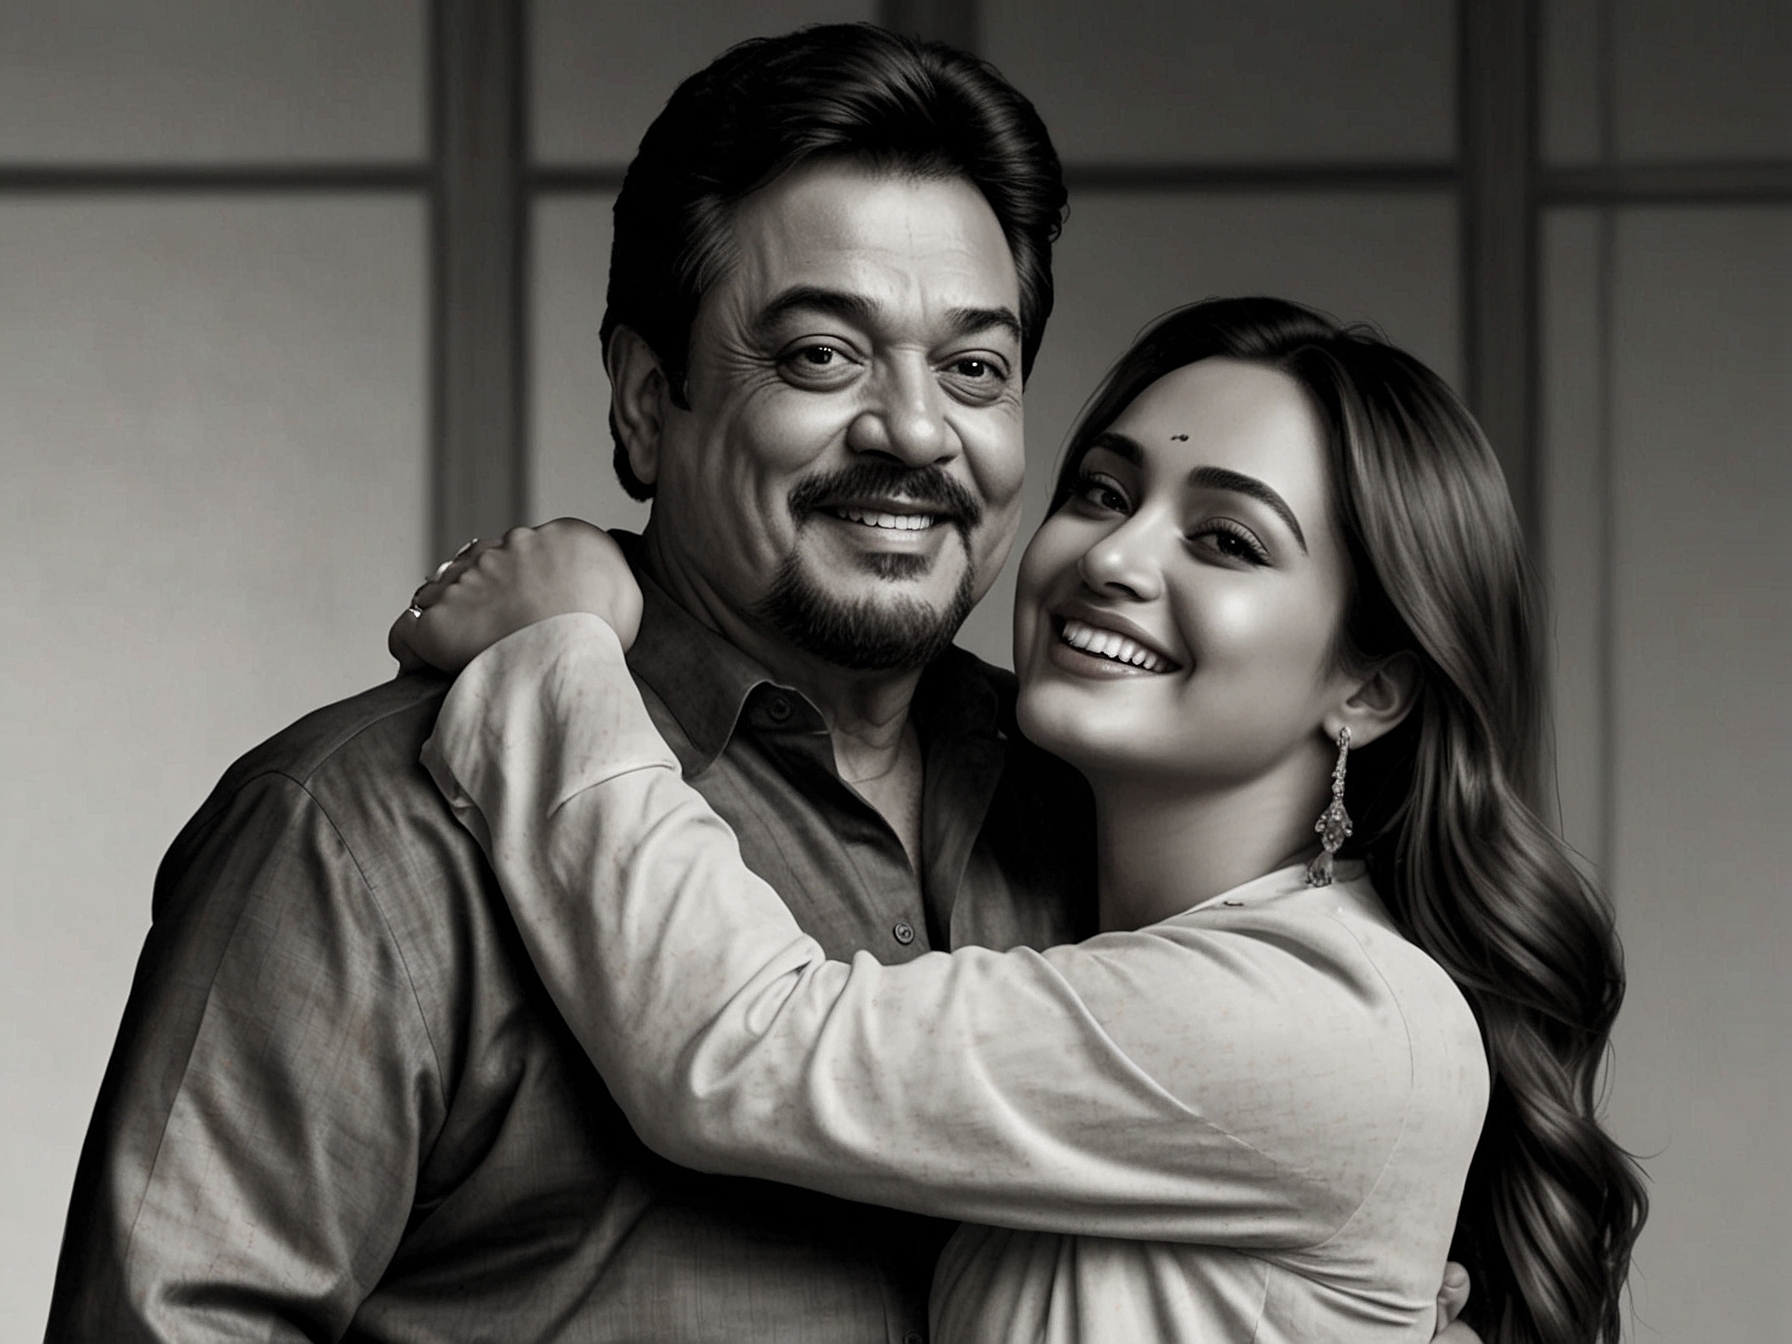 Shatrughan Sinha can be seen warmly embracing Zaheer Iqbal in a heartfelt moment, symbolizing his acceptance into the family. Sonakshi Sinha stands nearby, beaming with happiness.